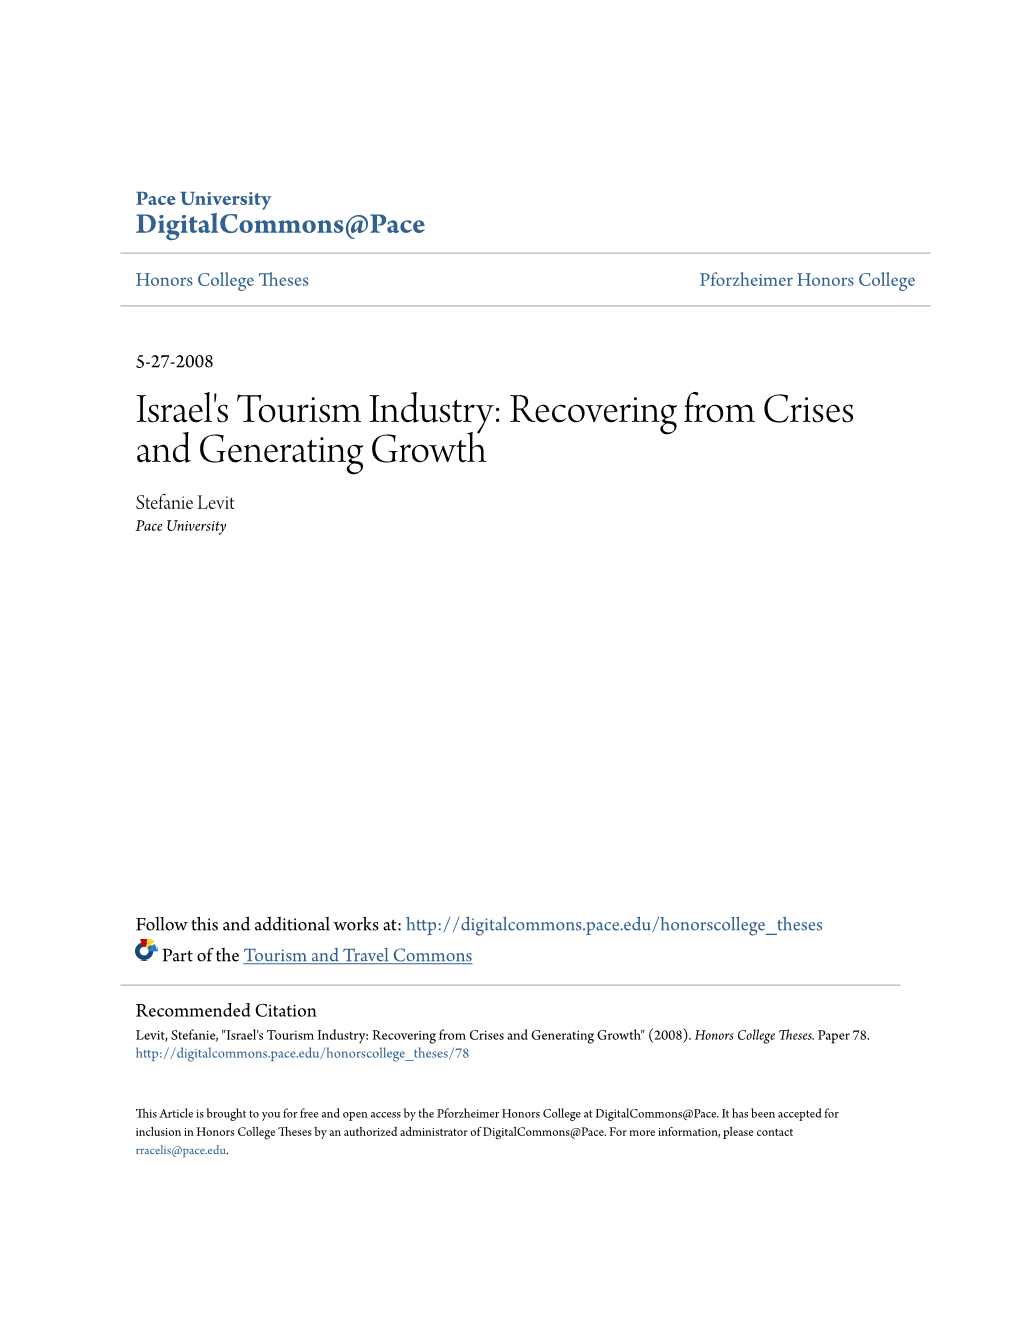 Israel's Tourism Industry: Recovering from Crises and Generating Growth Stefanie Levit Pace University